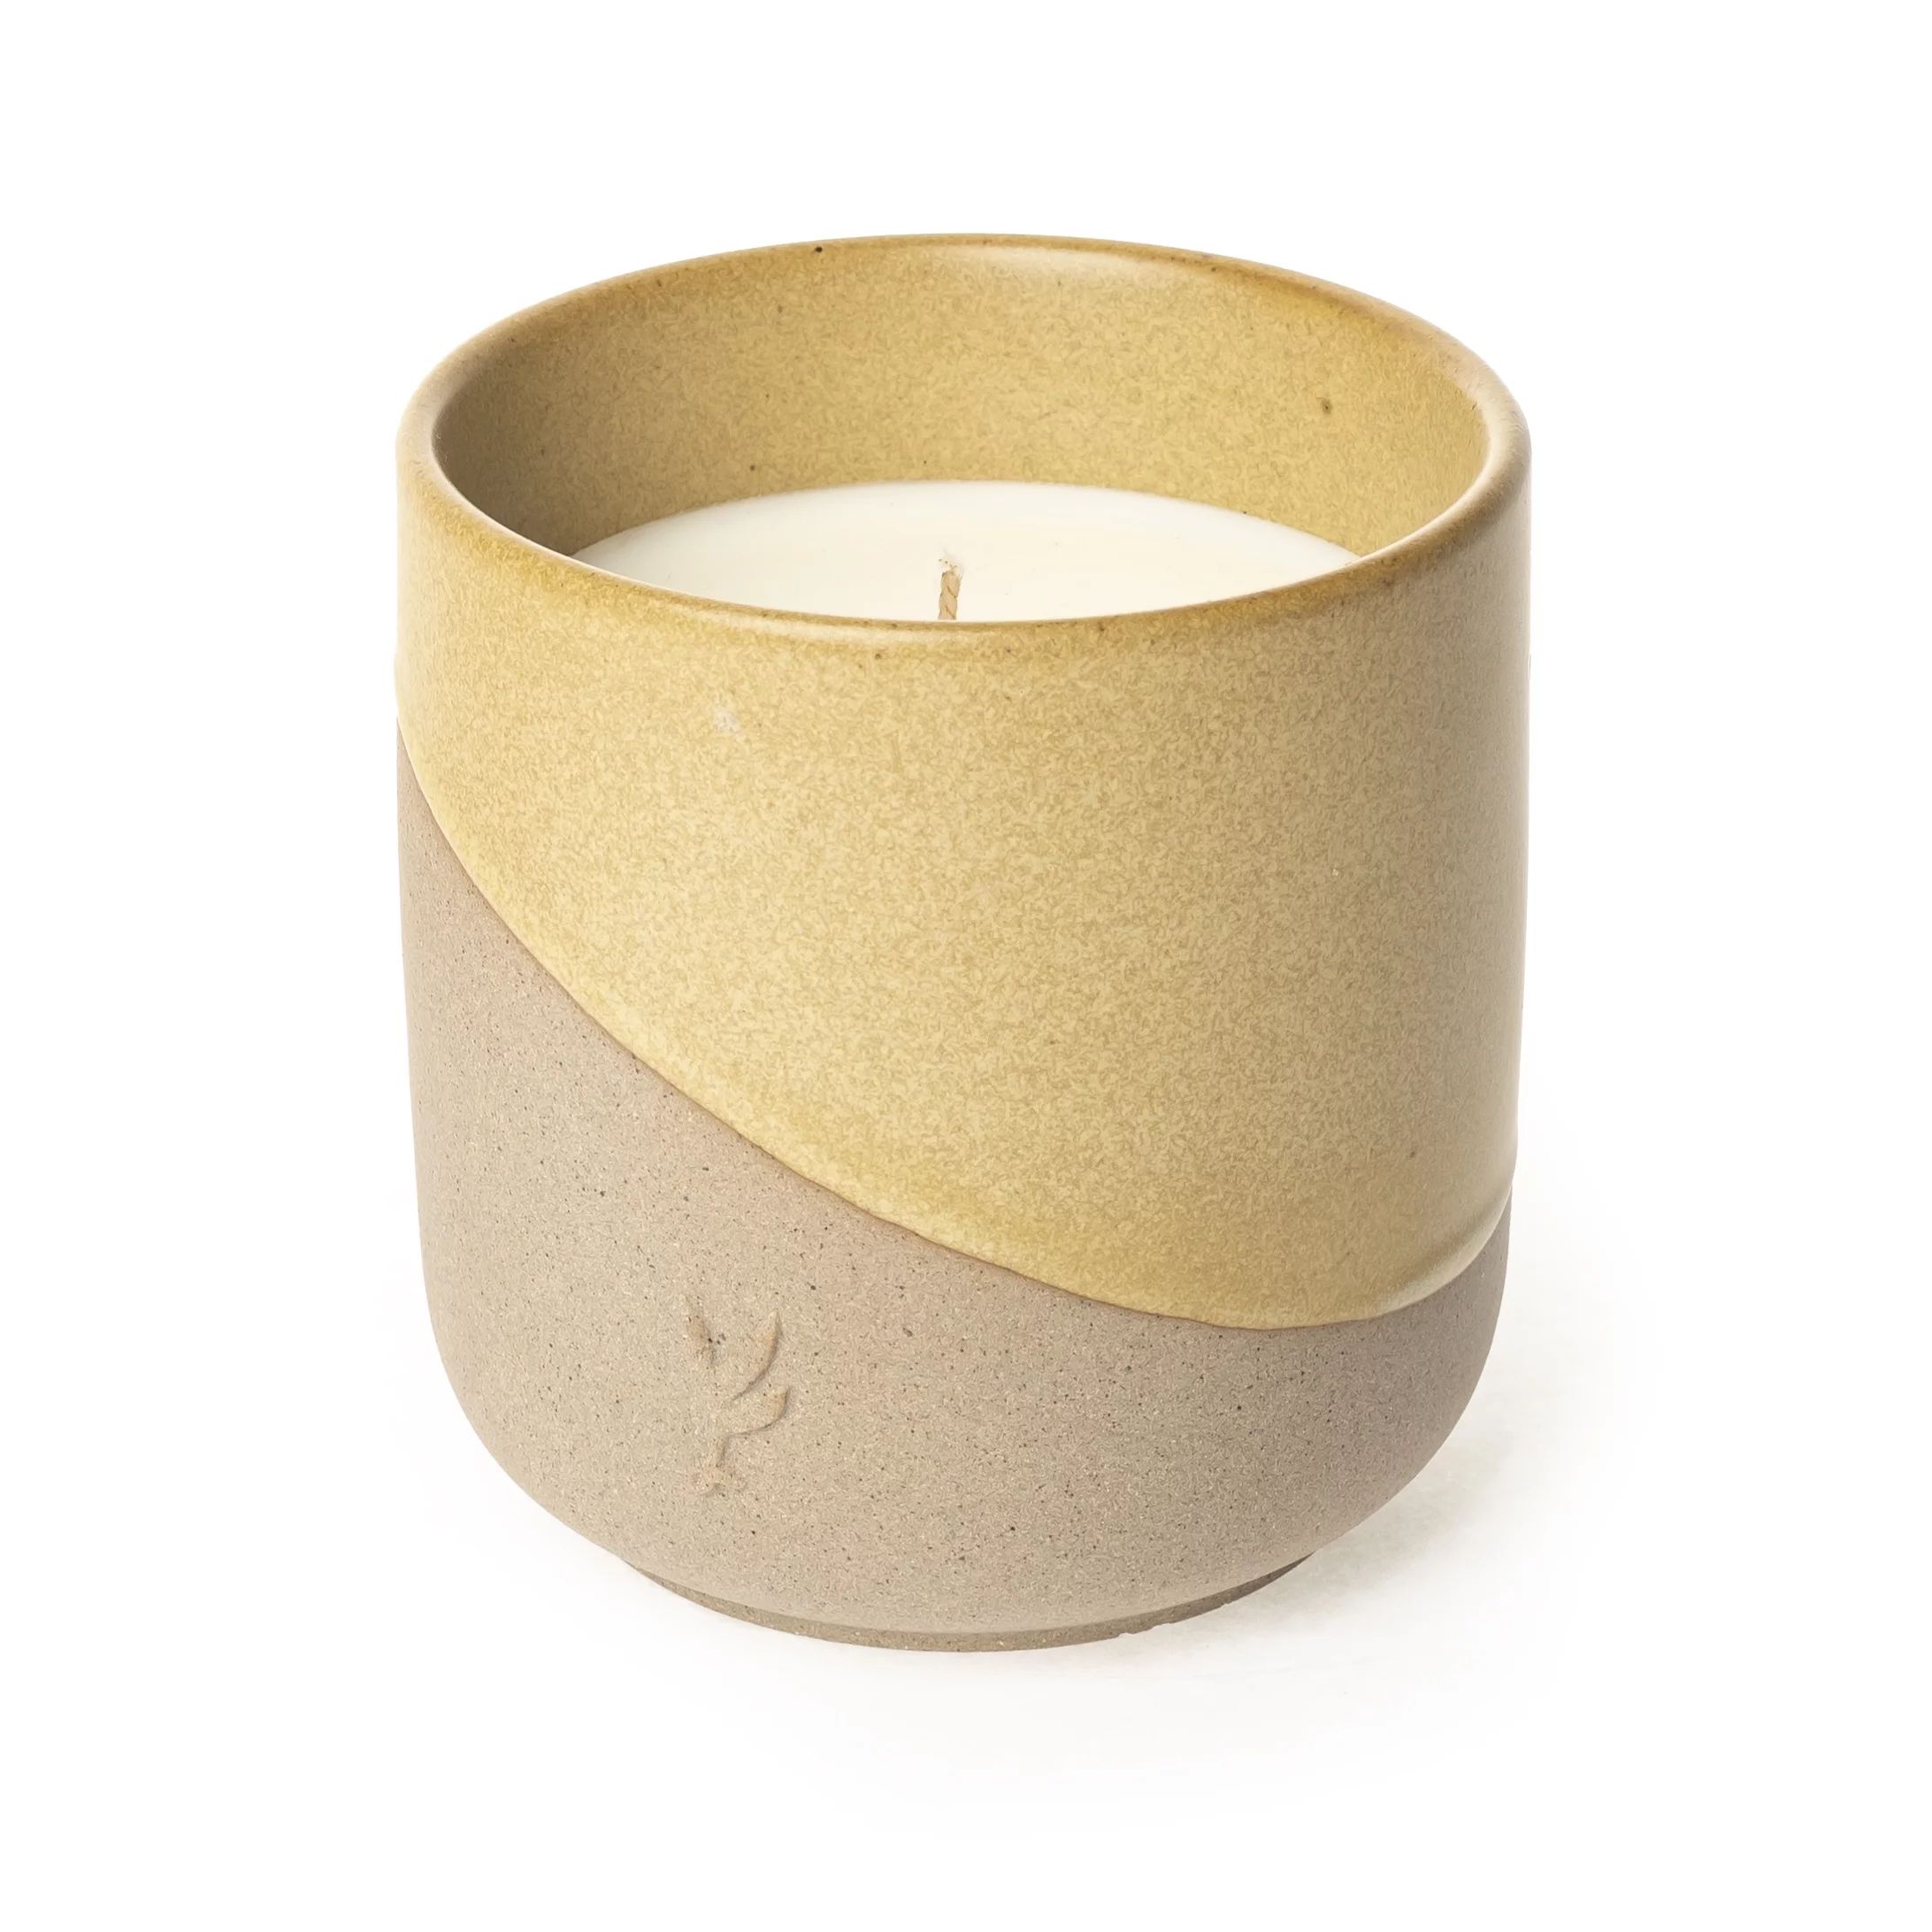 Better Homes & Gardens Honeysuckle Scented 13.9oz Ceramic Dip Single-Wick Candle by Dave & Jenny ... | Walmart (US)